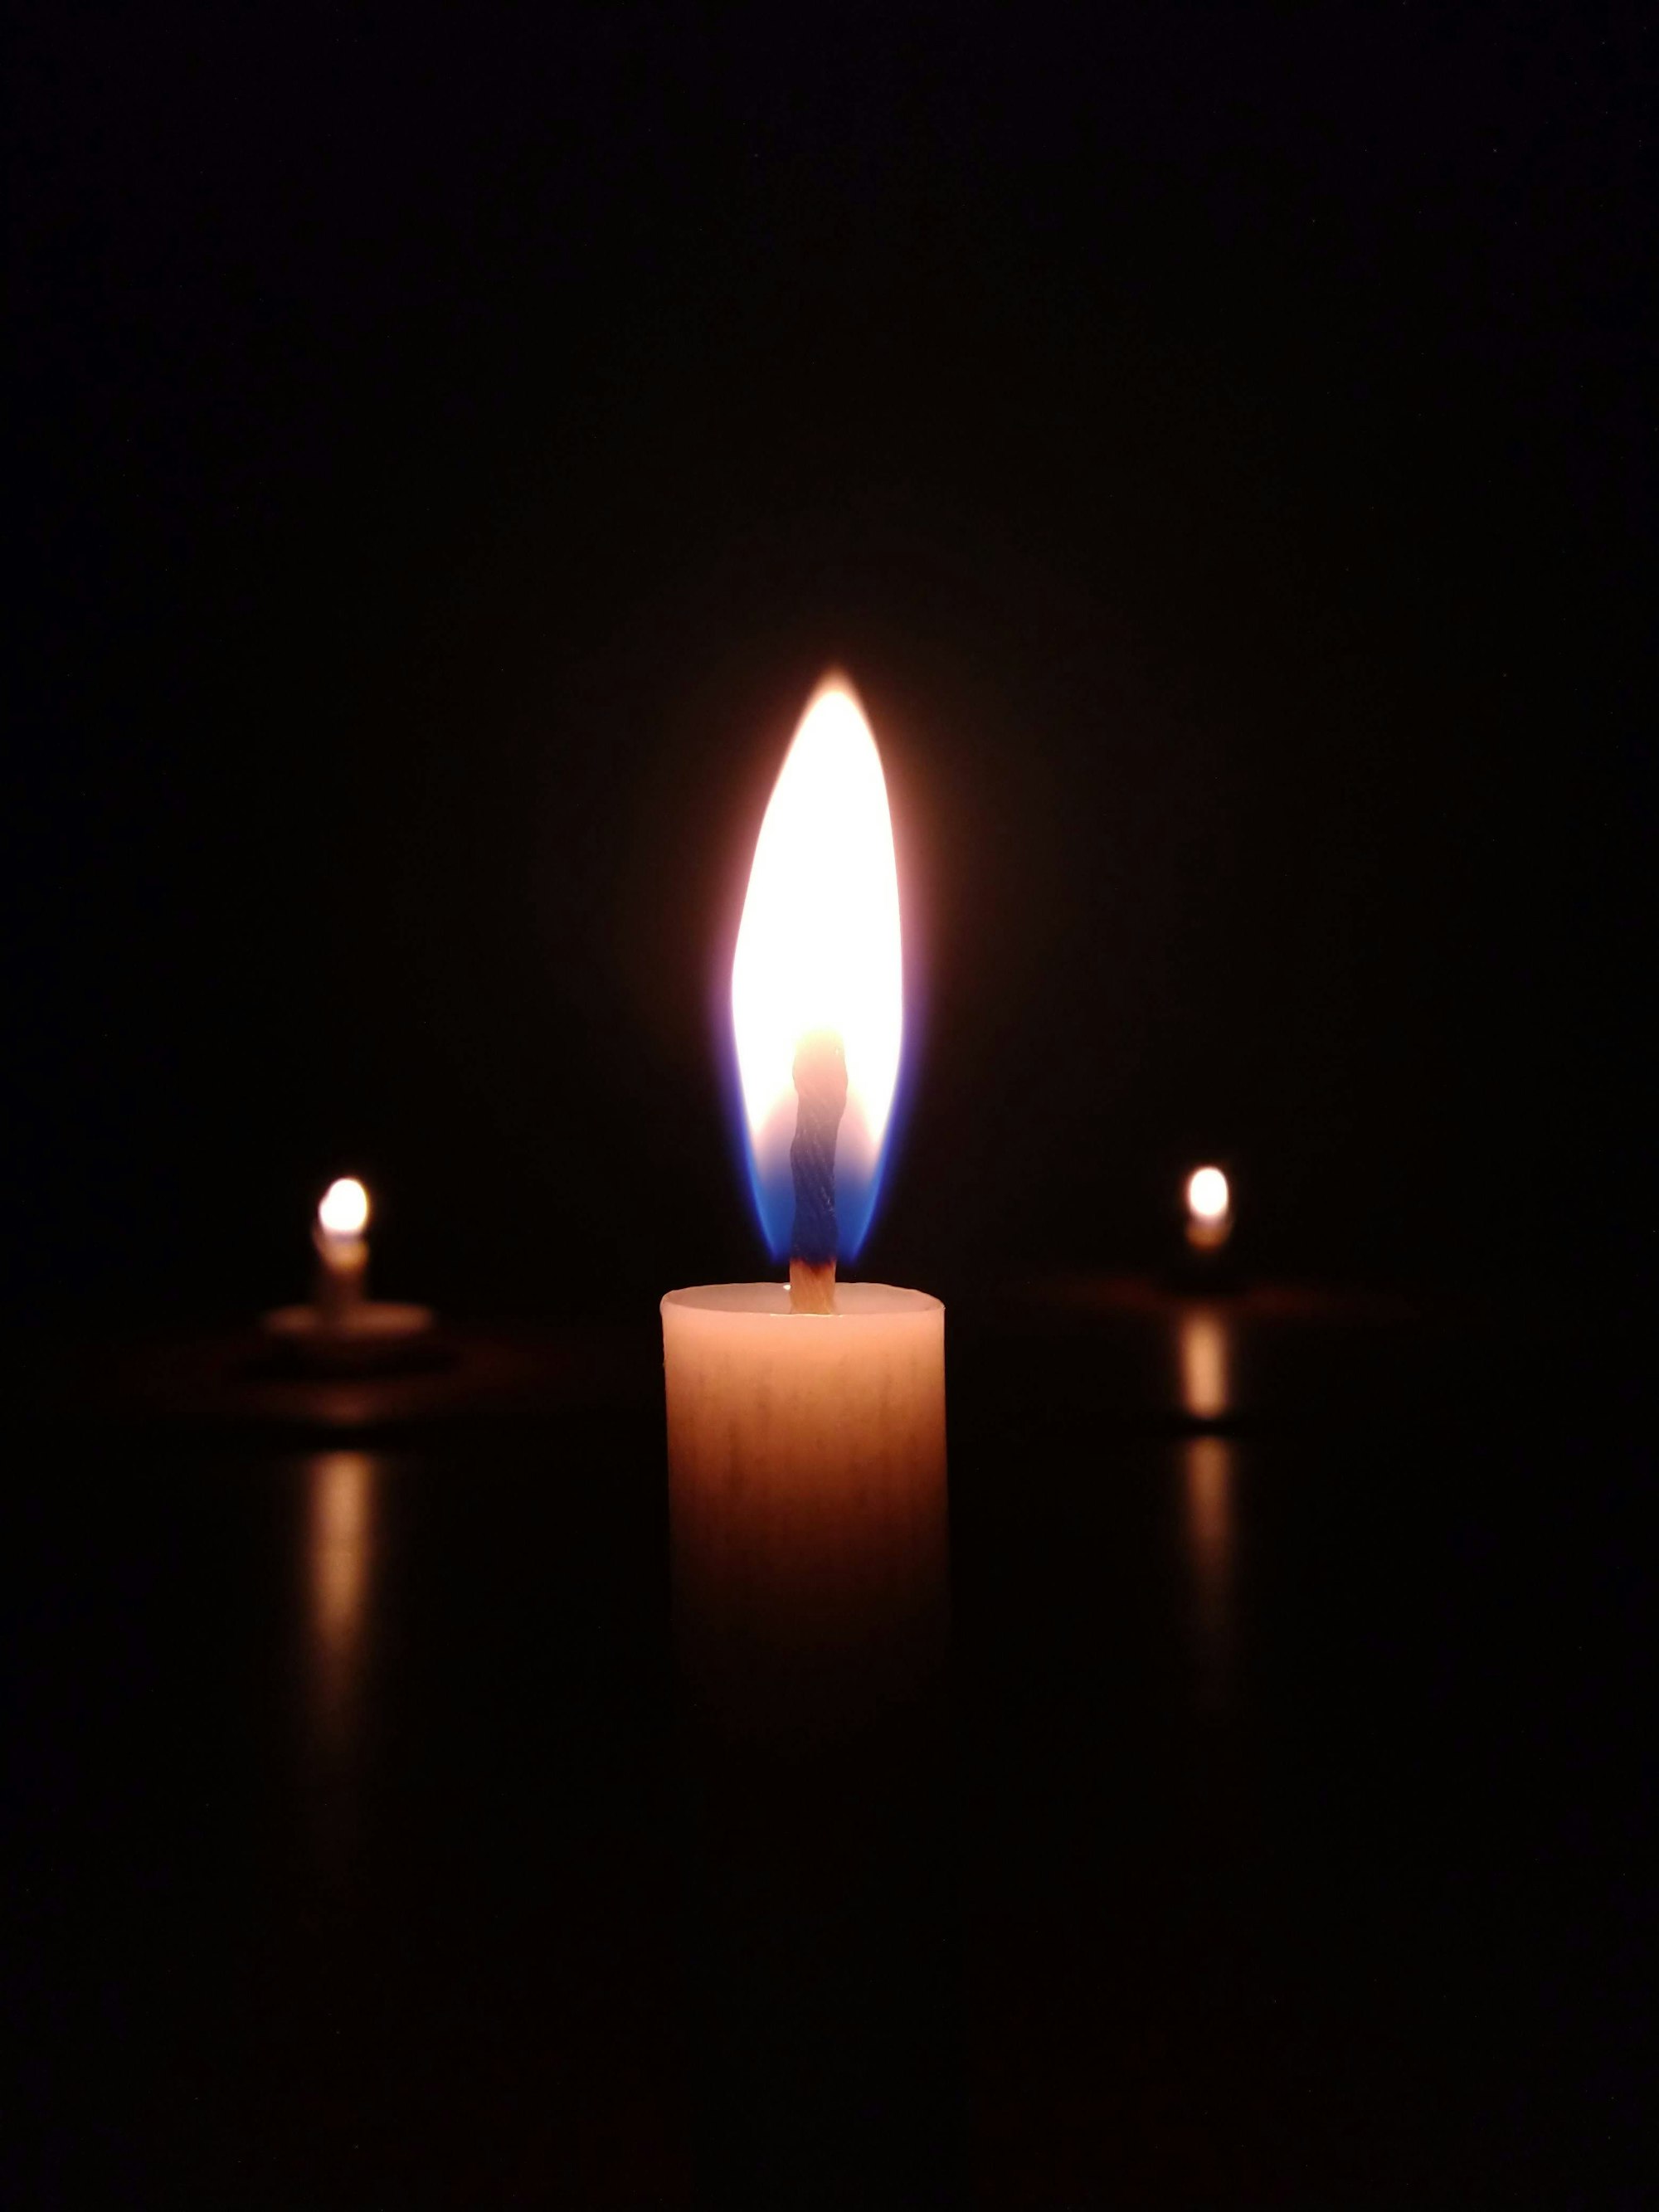 Candle light showing dark and luminous zones